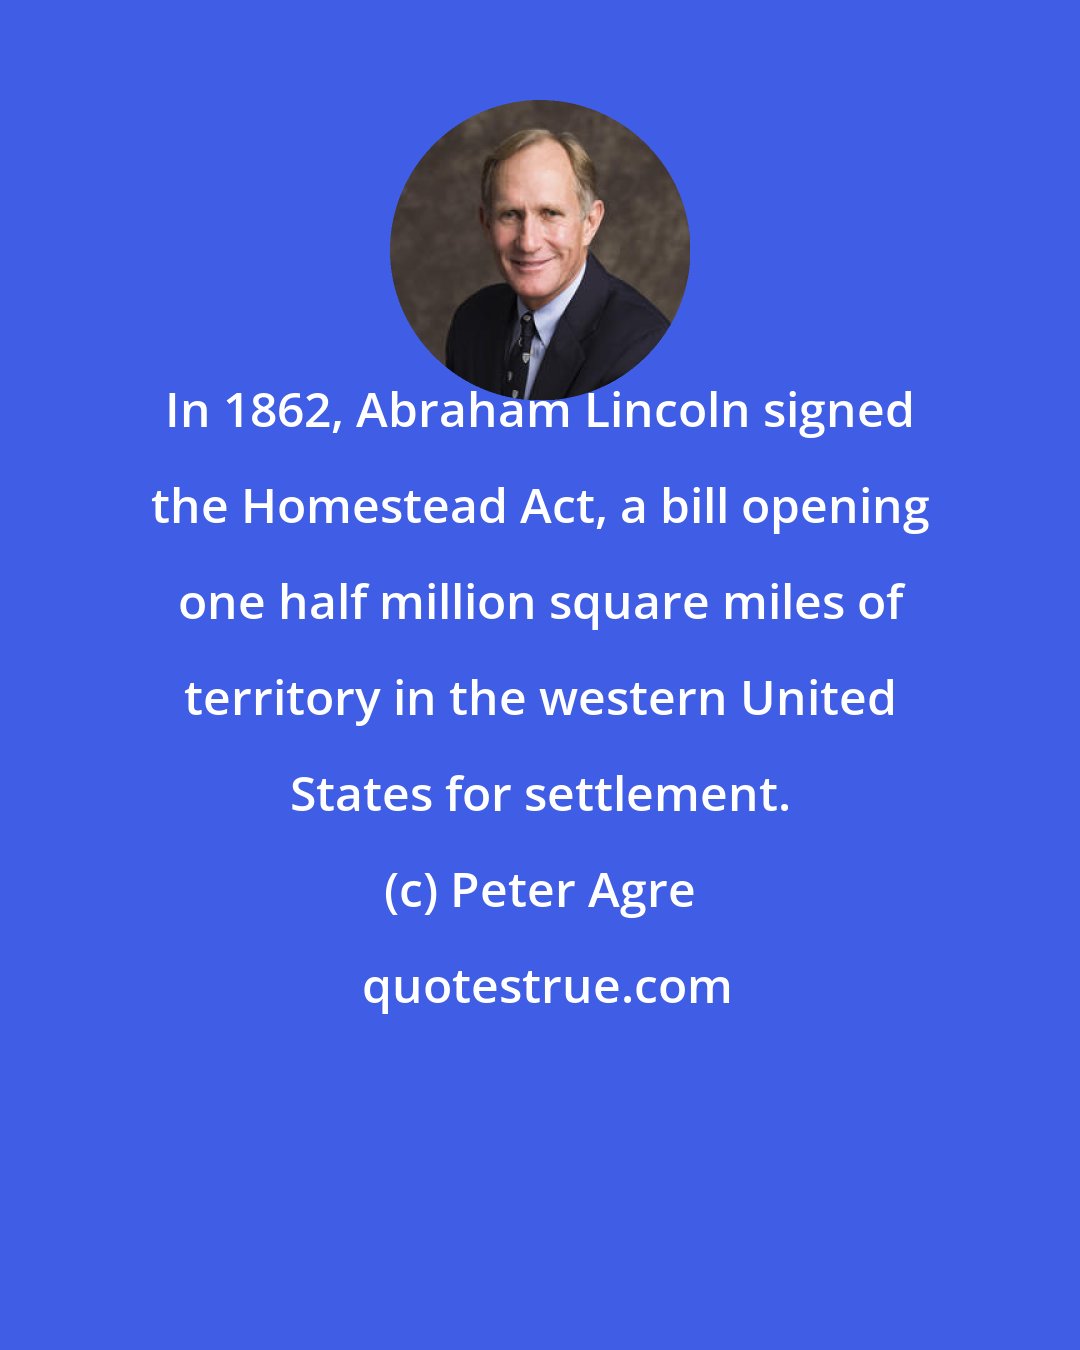 Peter Agre: In 1862, Abraham Lincoln signed the Homestead Act, a bill opening one half million square miles of territory in the western United States for settlement.